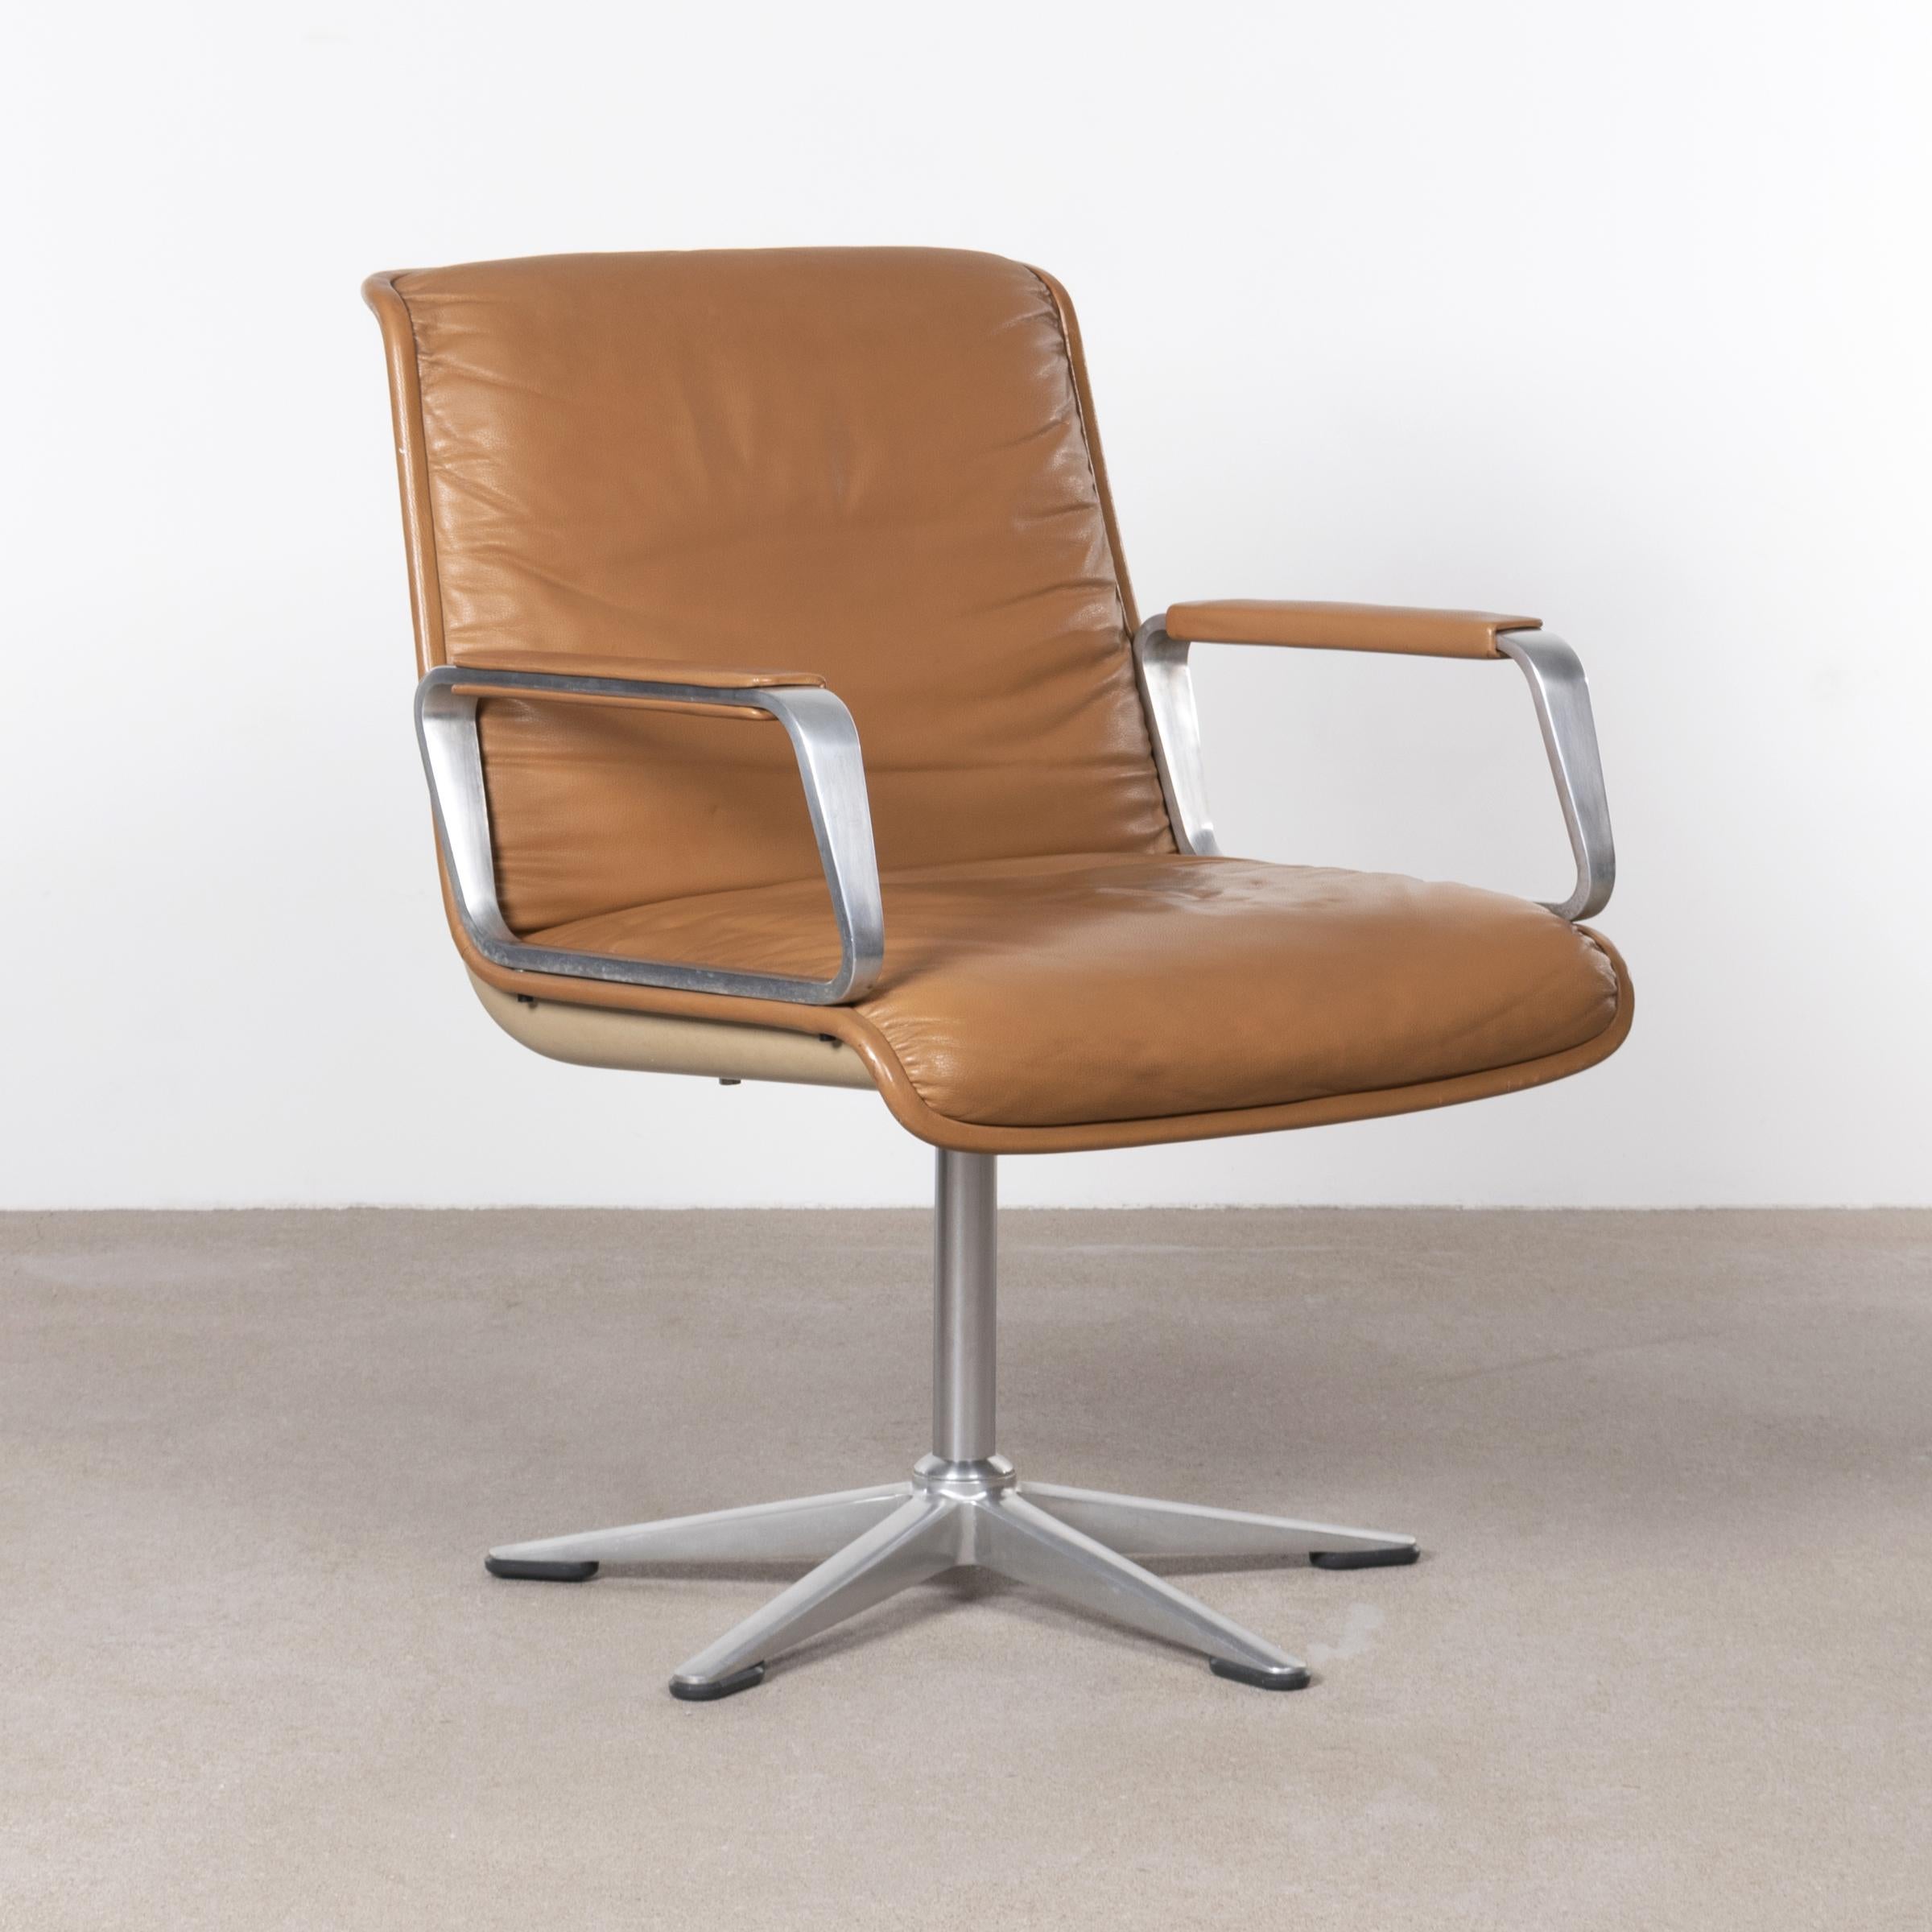 Soft pad chairs (Programm 2000) in Cognac leather for Wilkhahn designed by Delta Design (Michael Conrad, Detlef Unger and Henner Werner) in 1968. Aluminum polished (non-swivel) base with fiberglass seat shell padded with high quality leather. The